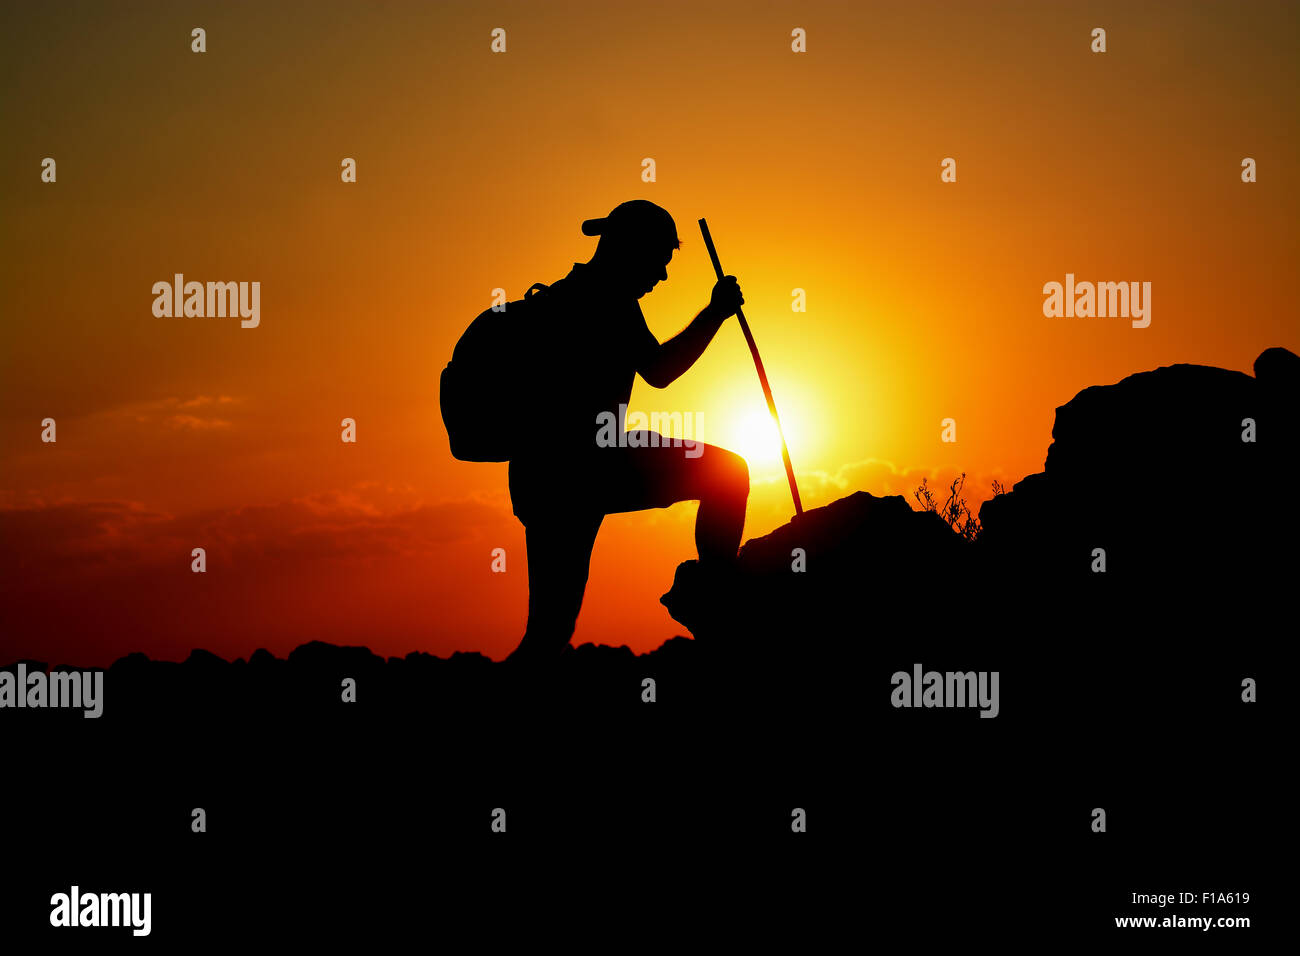 Silhouette of Freedom and Determination Stock Photo